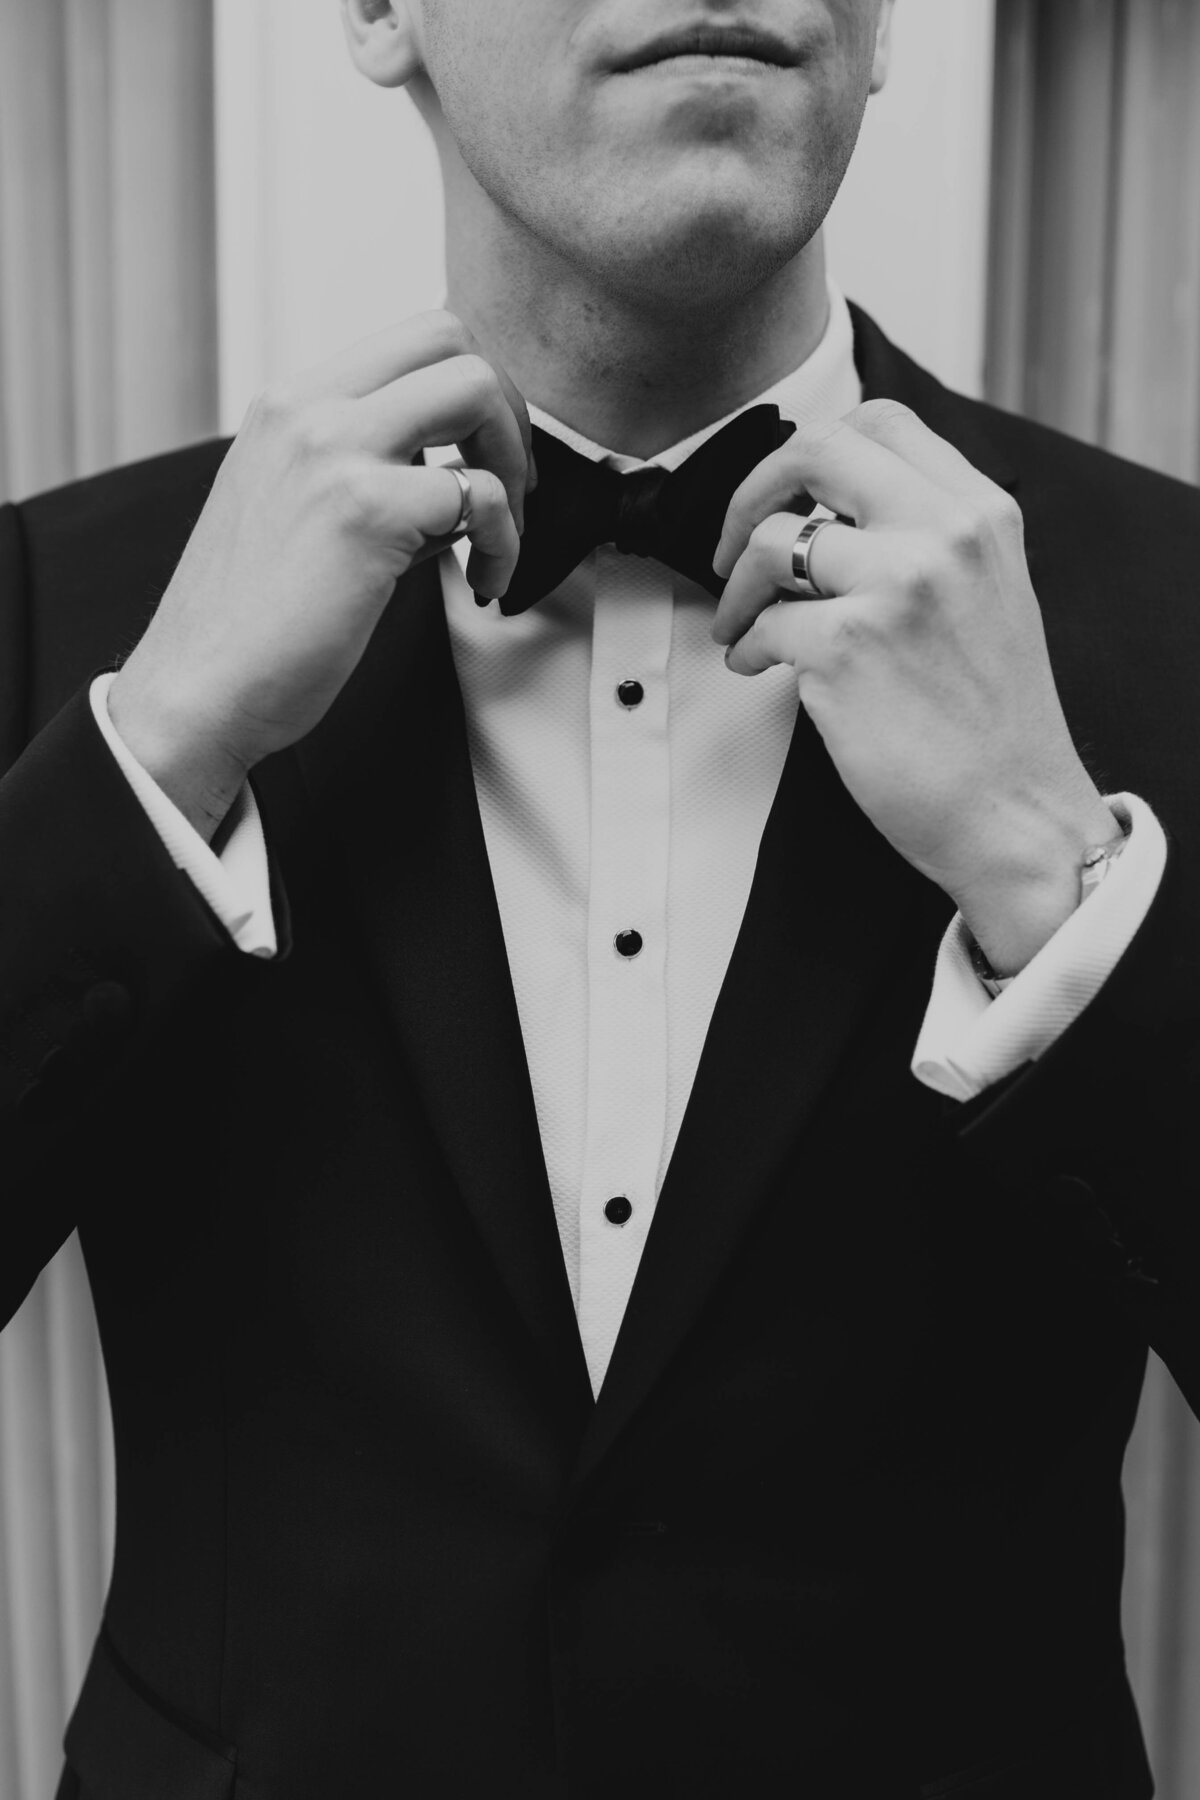 Groom adjust his bow tie in black and white portrait.